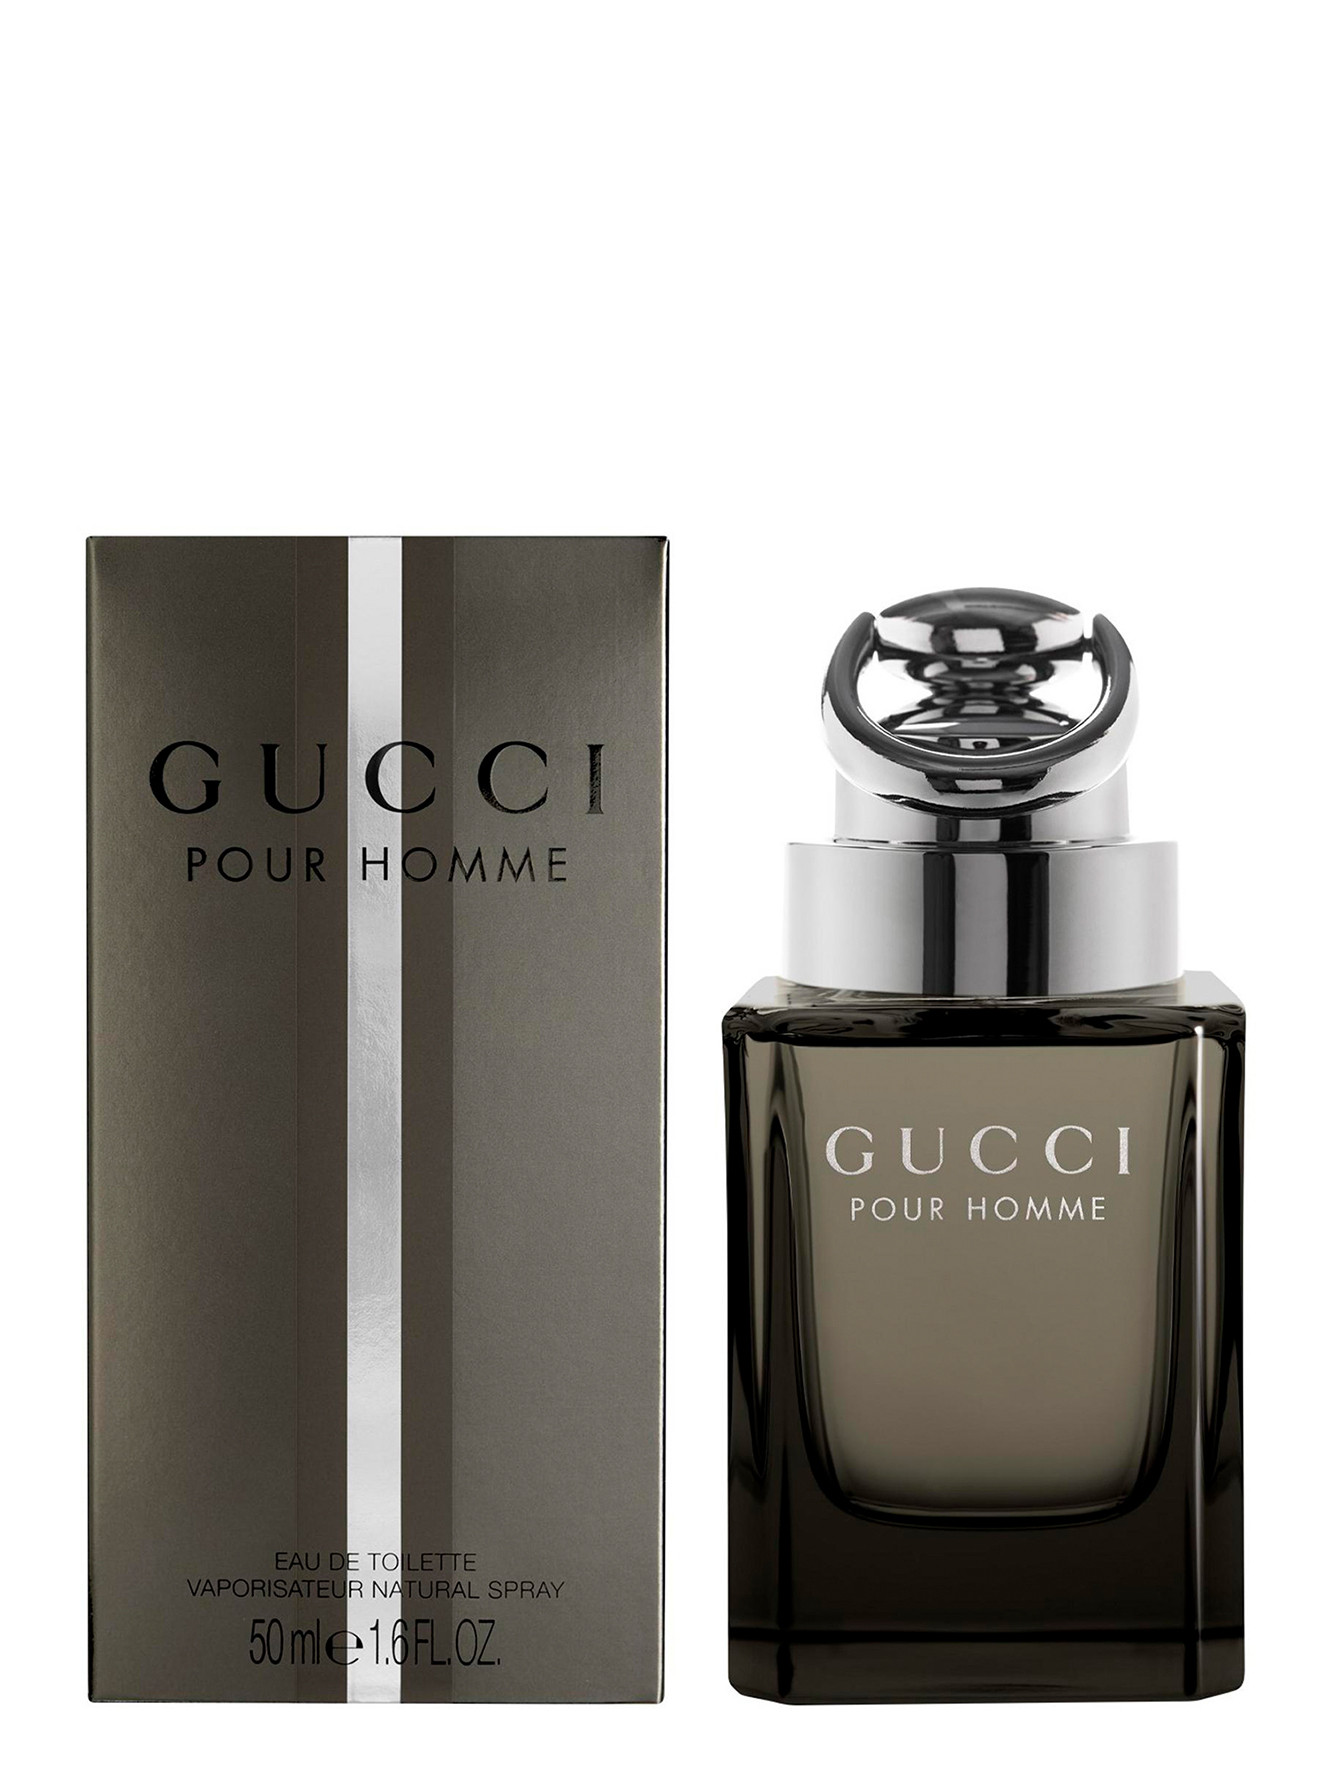 Туалетная вода Gucci by Gucci Pour Homme, 50 мл - Обтравка1